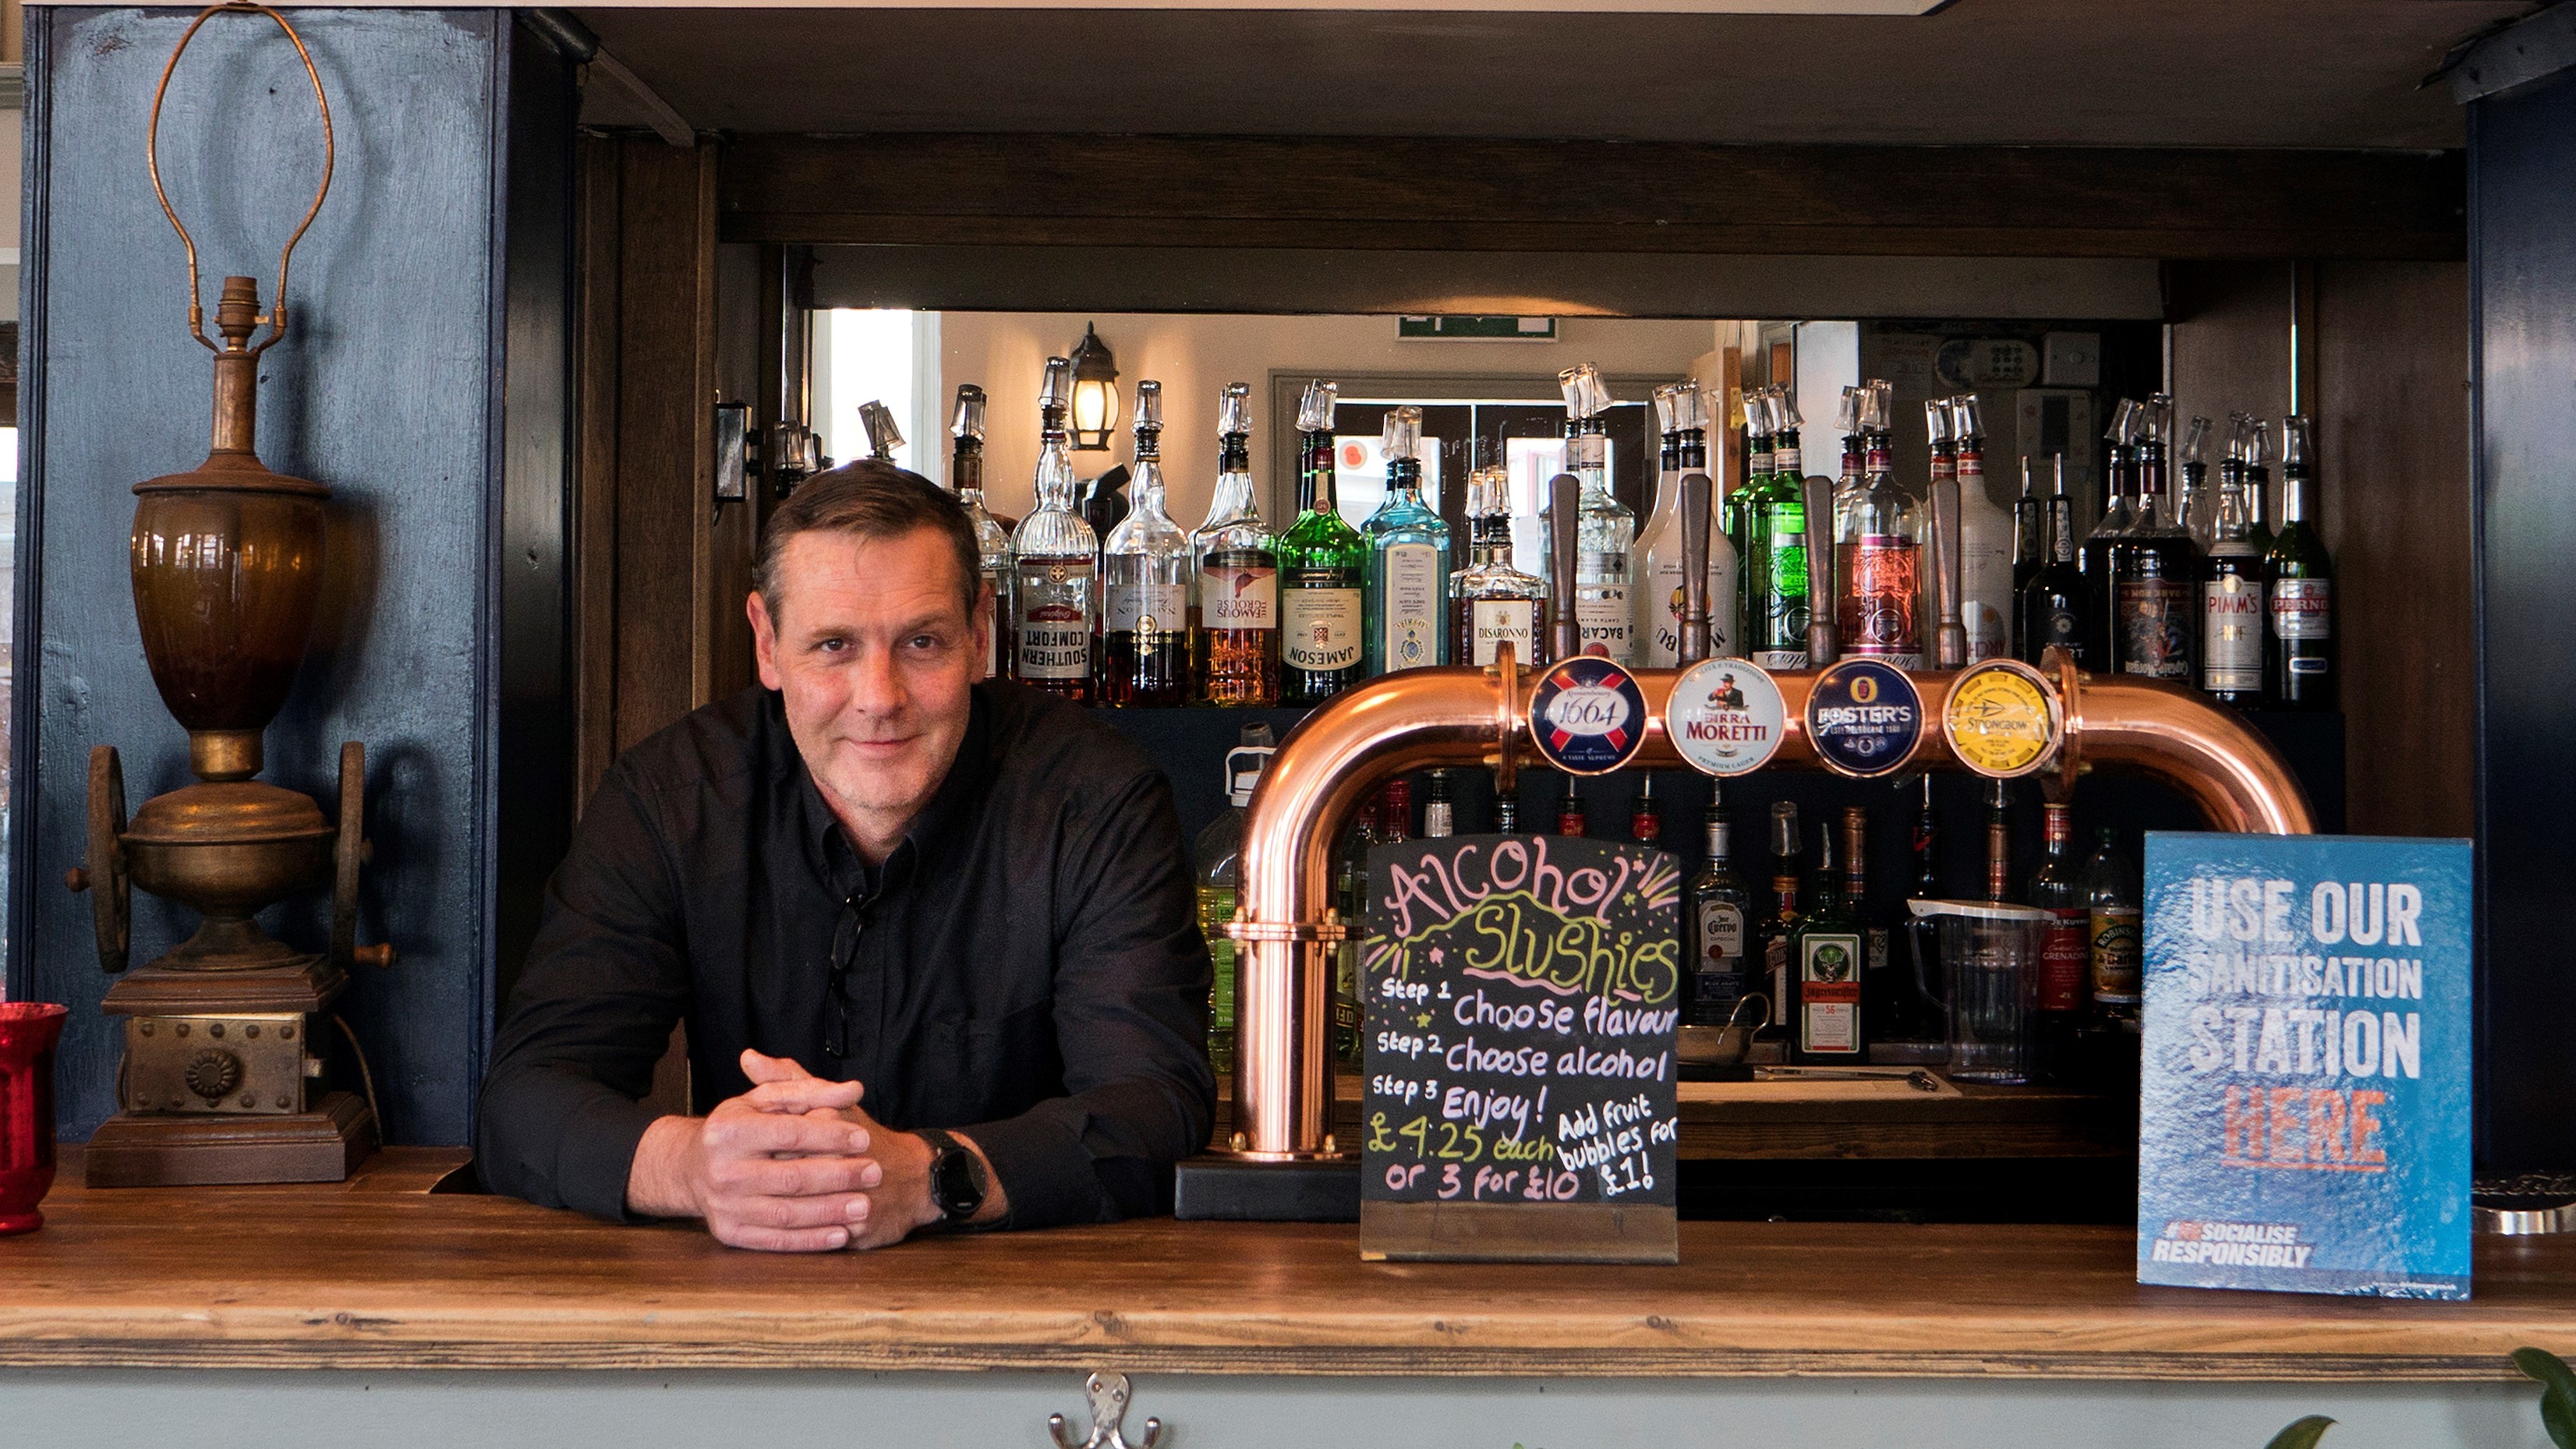 Matthew Greene is the owner of the Blue Anchor pub in Byfleet, Surrey.